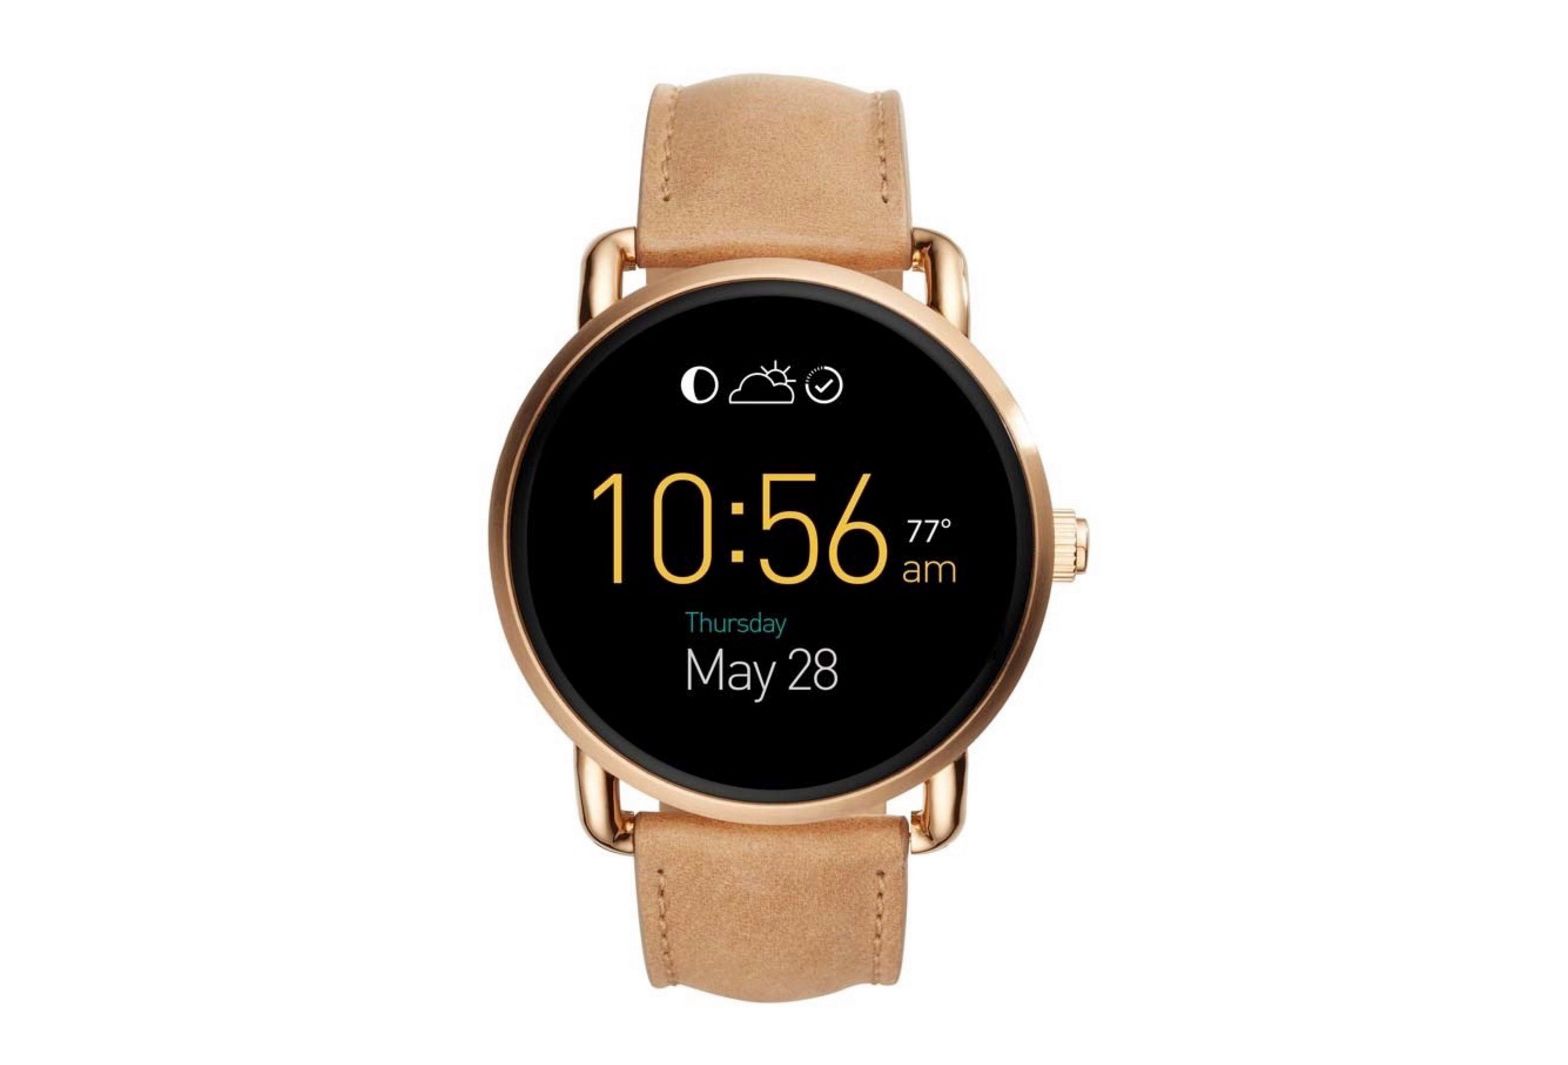 fossil s connected device lineup adds two android wear watches and more image 1